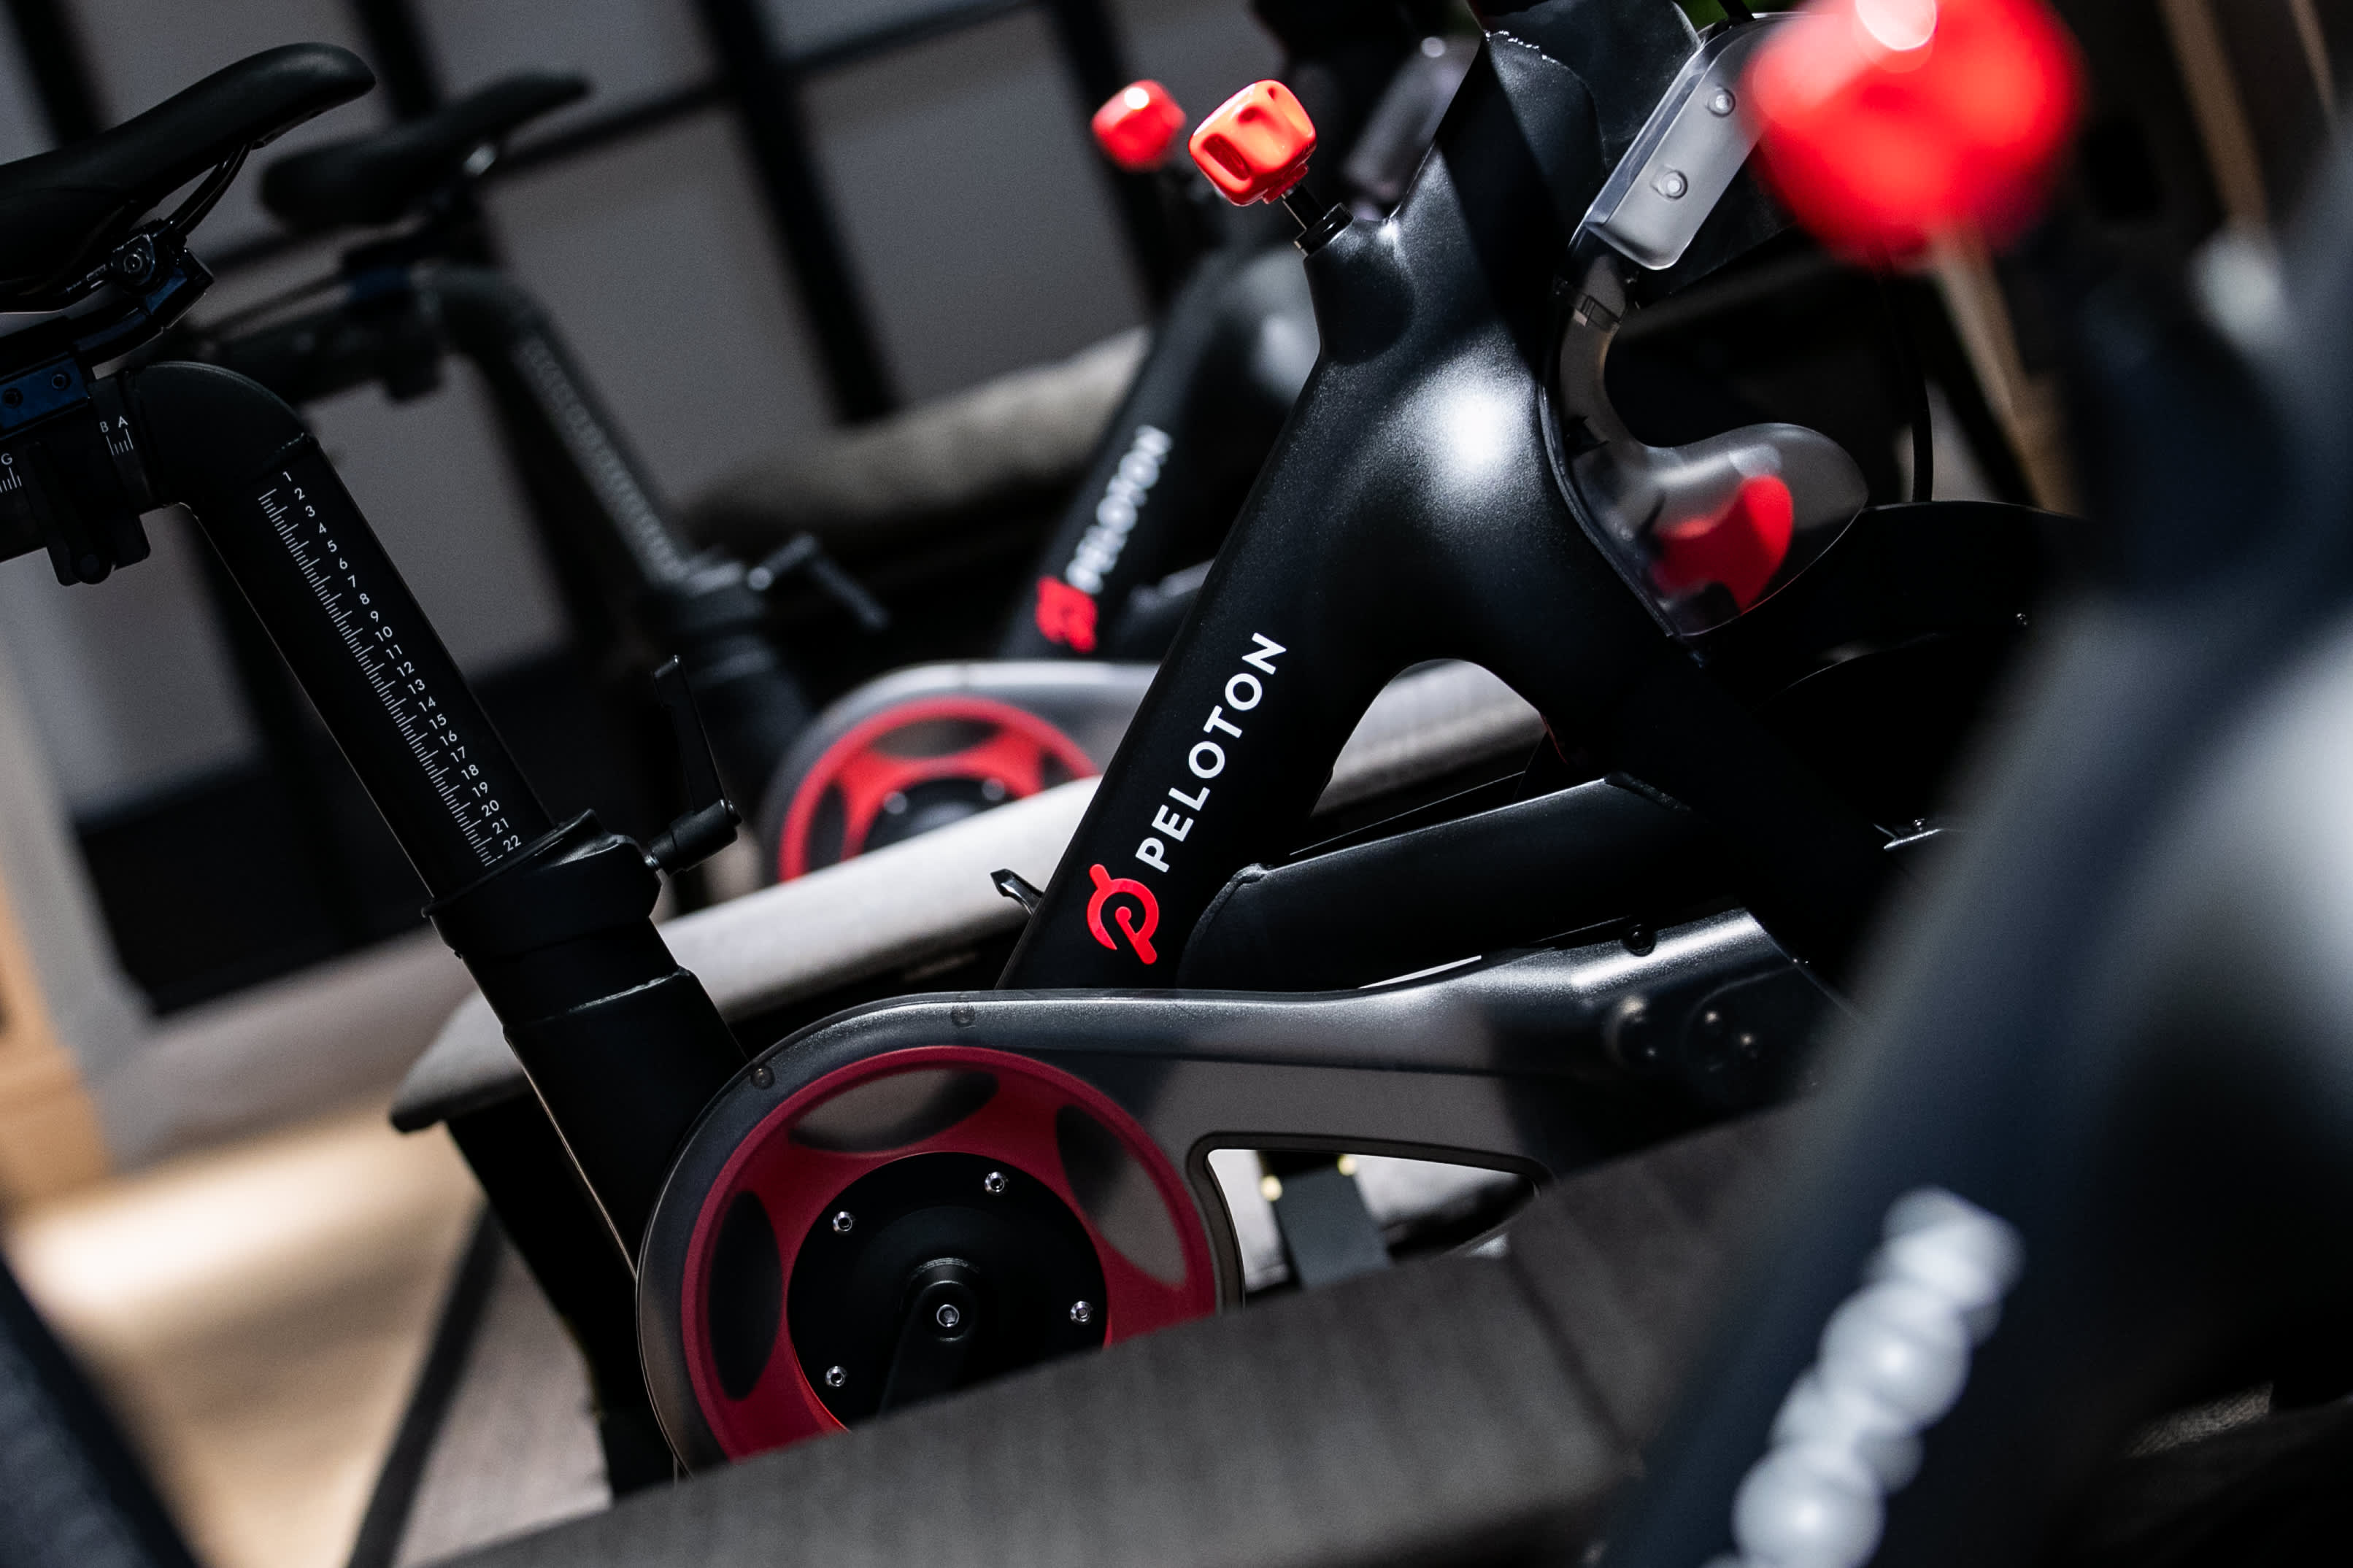 Peloton’s brand gets slammed again after an unfavorable portrayal in ‘Billions’